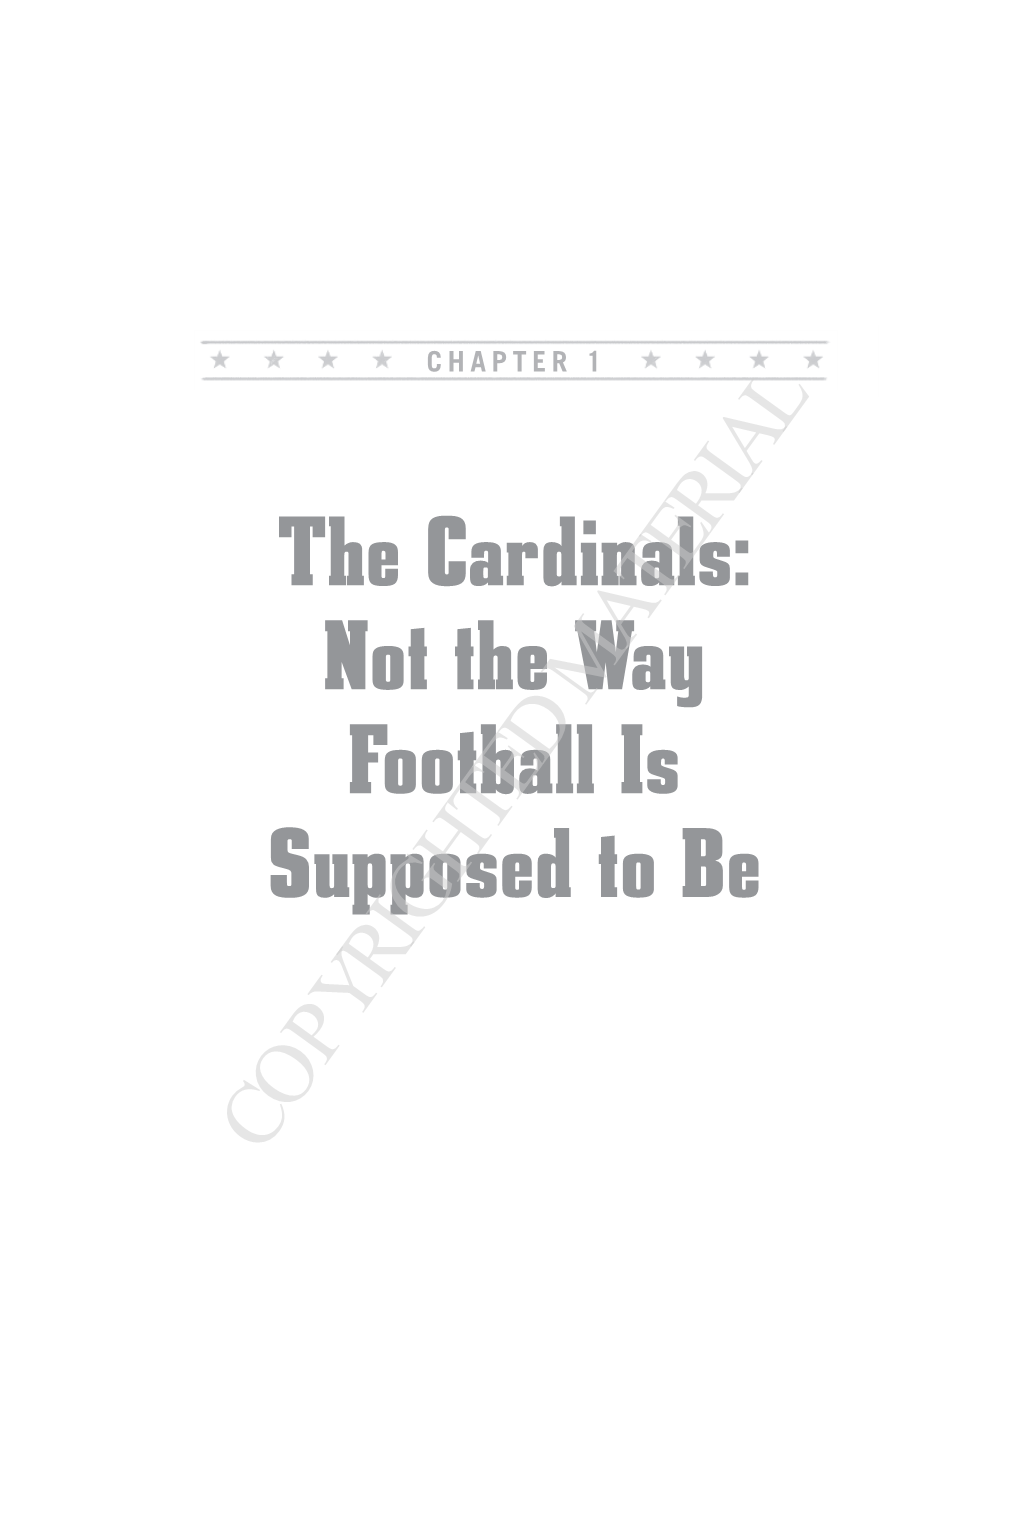 The Cardinals: Not the Way Football Is Supposed to Be